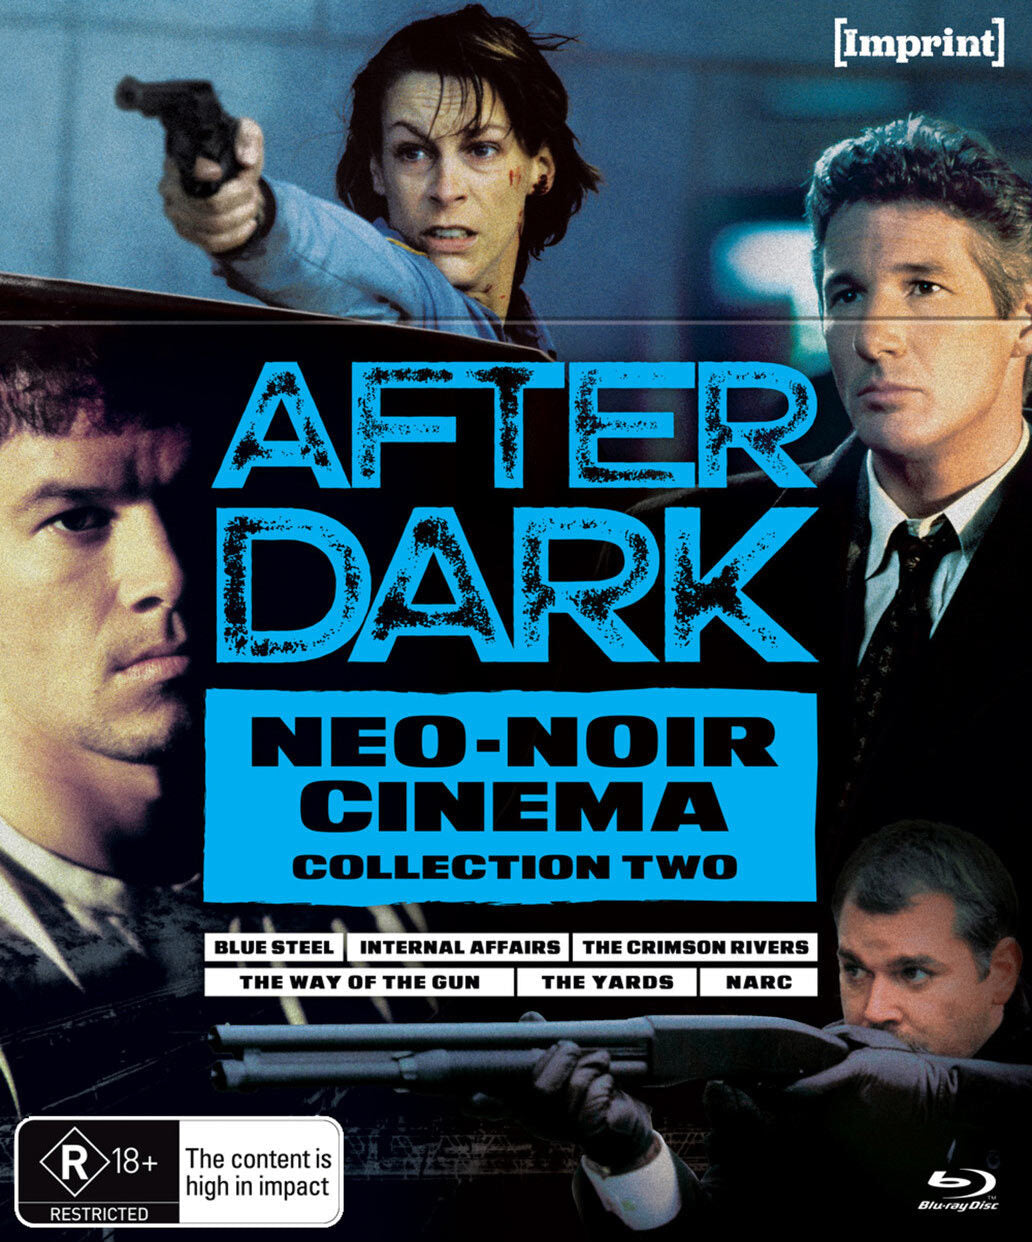 AFTER DARK: NEO NOIR CINEMA COLLECTION VOLUME TWO (REGION FREE IMPORT - LIMITED EDITION) BLU-RAY